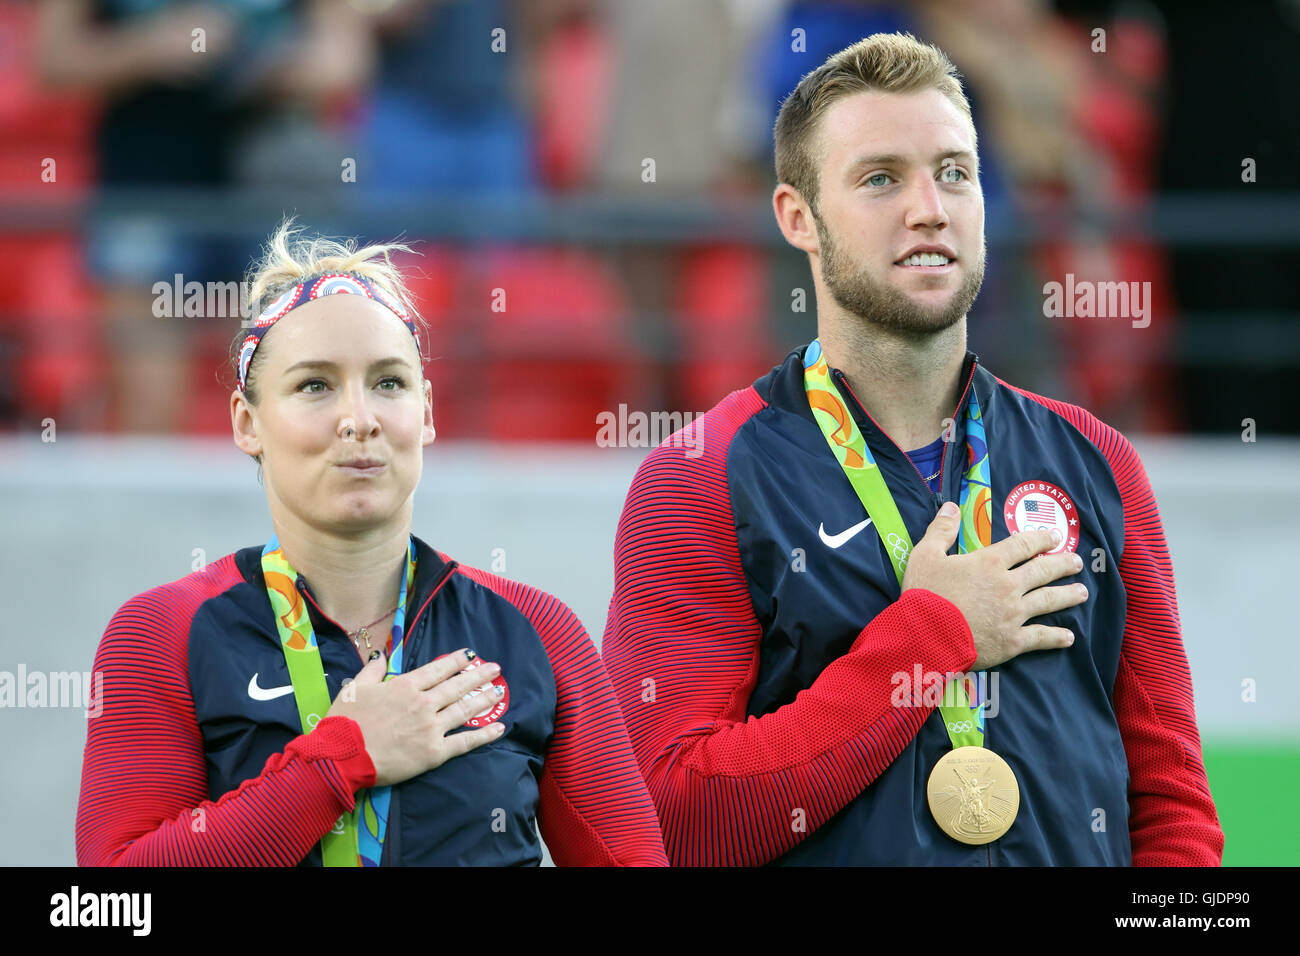 Rio de Janeiro, Brazil 14th Aug, 2016 Realisation sinking in for Bethanie Mattek-Sands and Jack Sock at winning the Gold Medal in the Olympics Mixed Doubles Tennis Final in Rio de Janeiro.They beat Venus Williams and Rajeev Ram. Stock Photo